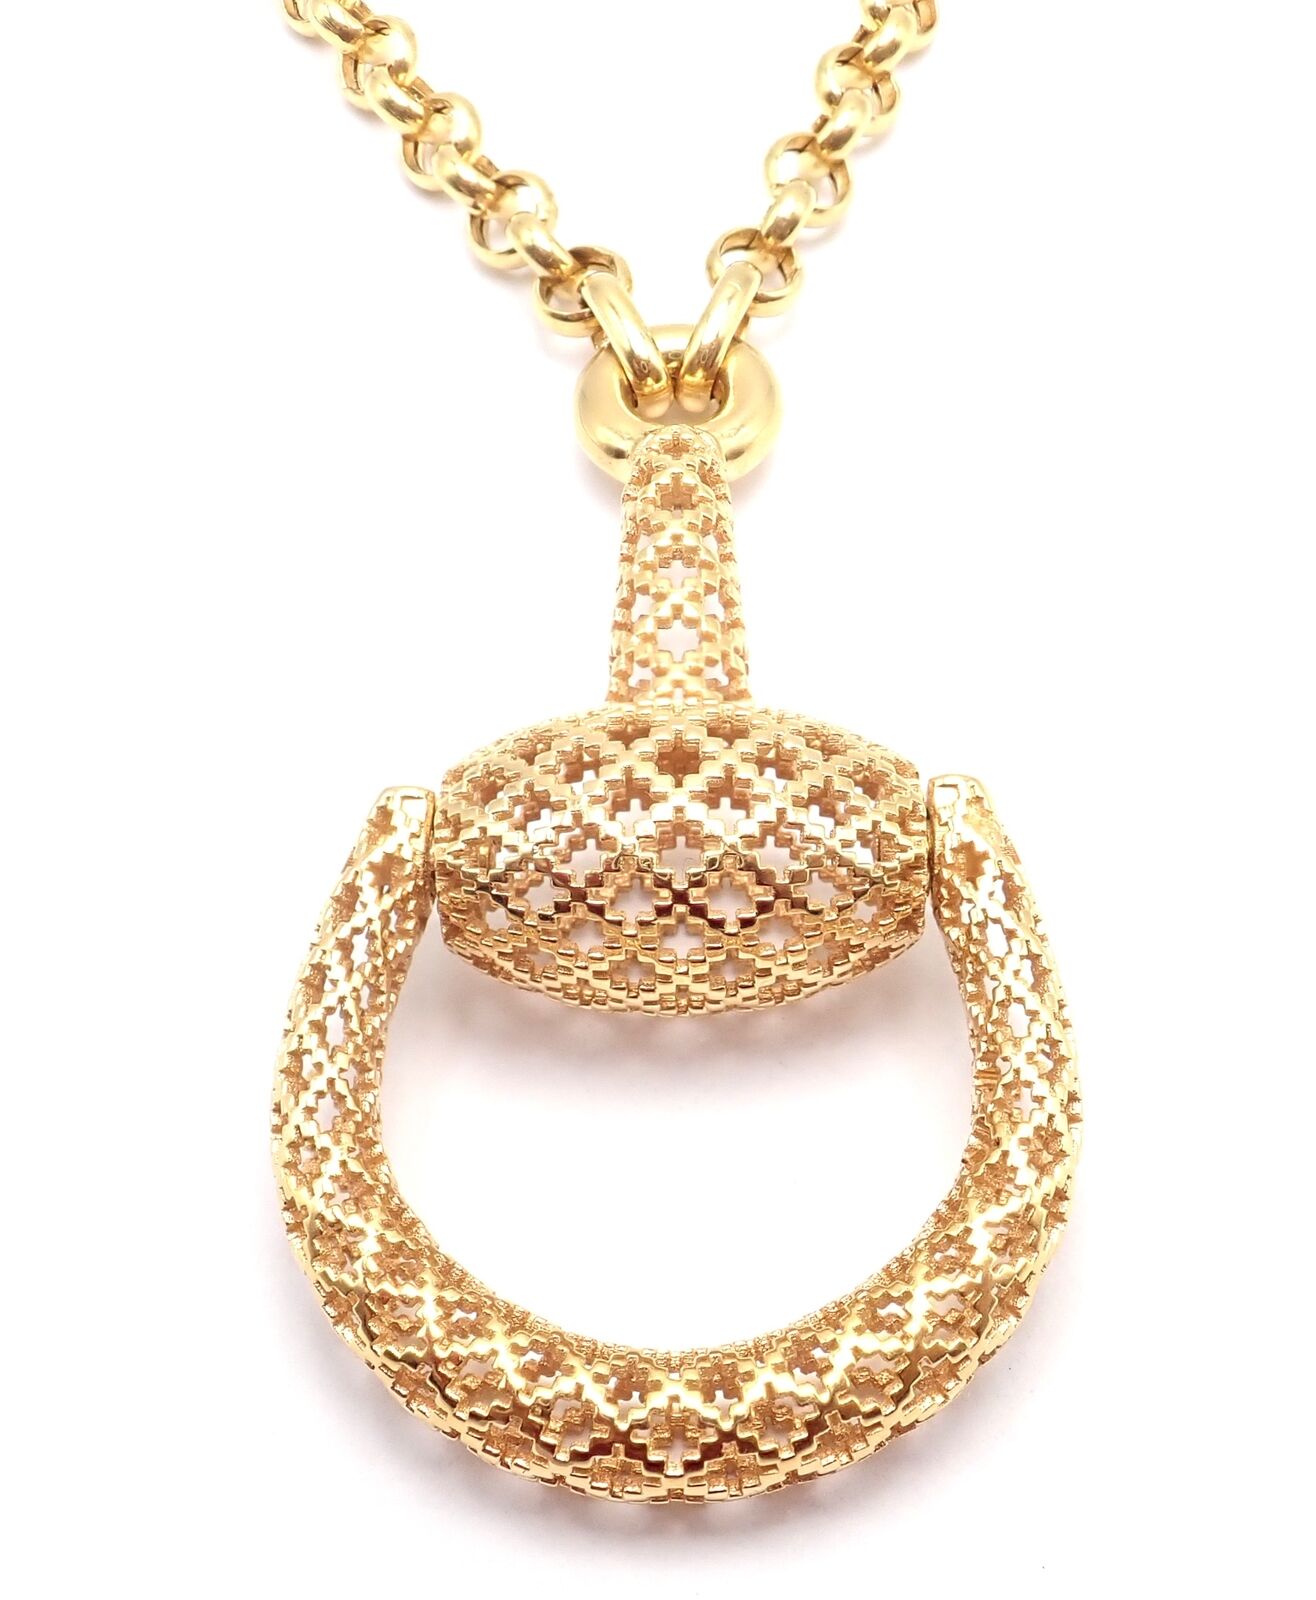 Gucci Jewelry & Watches:Fine Jewelry:Necklaces & Pendants Rare! Authentic Gucci 18k Yellow Gold Large Horsebit Pendant Link Chain Necklace